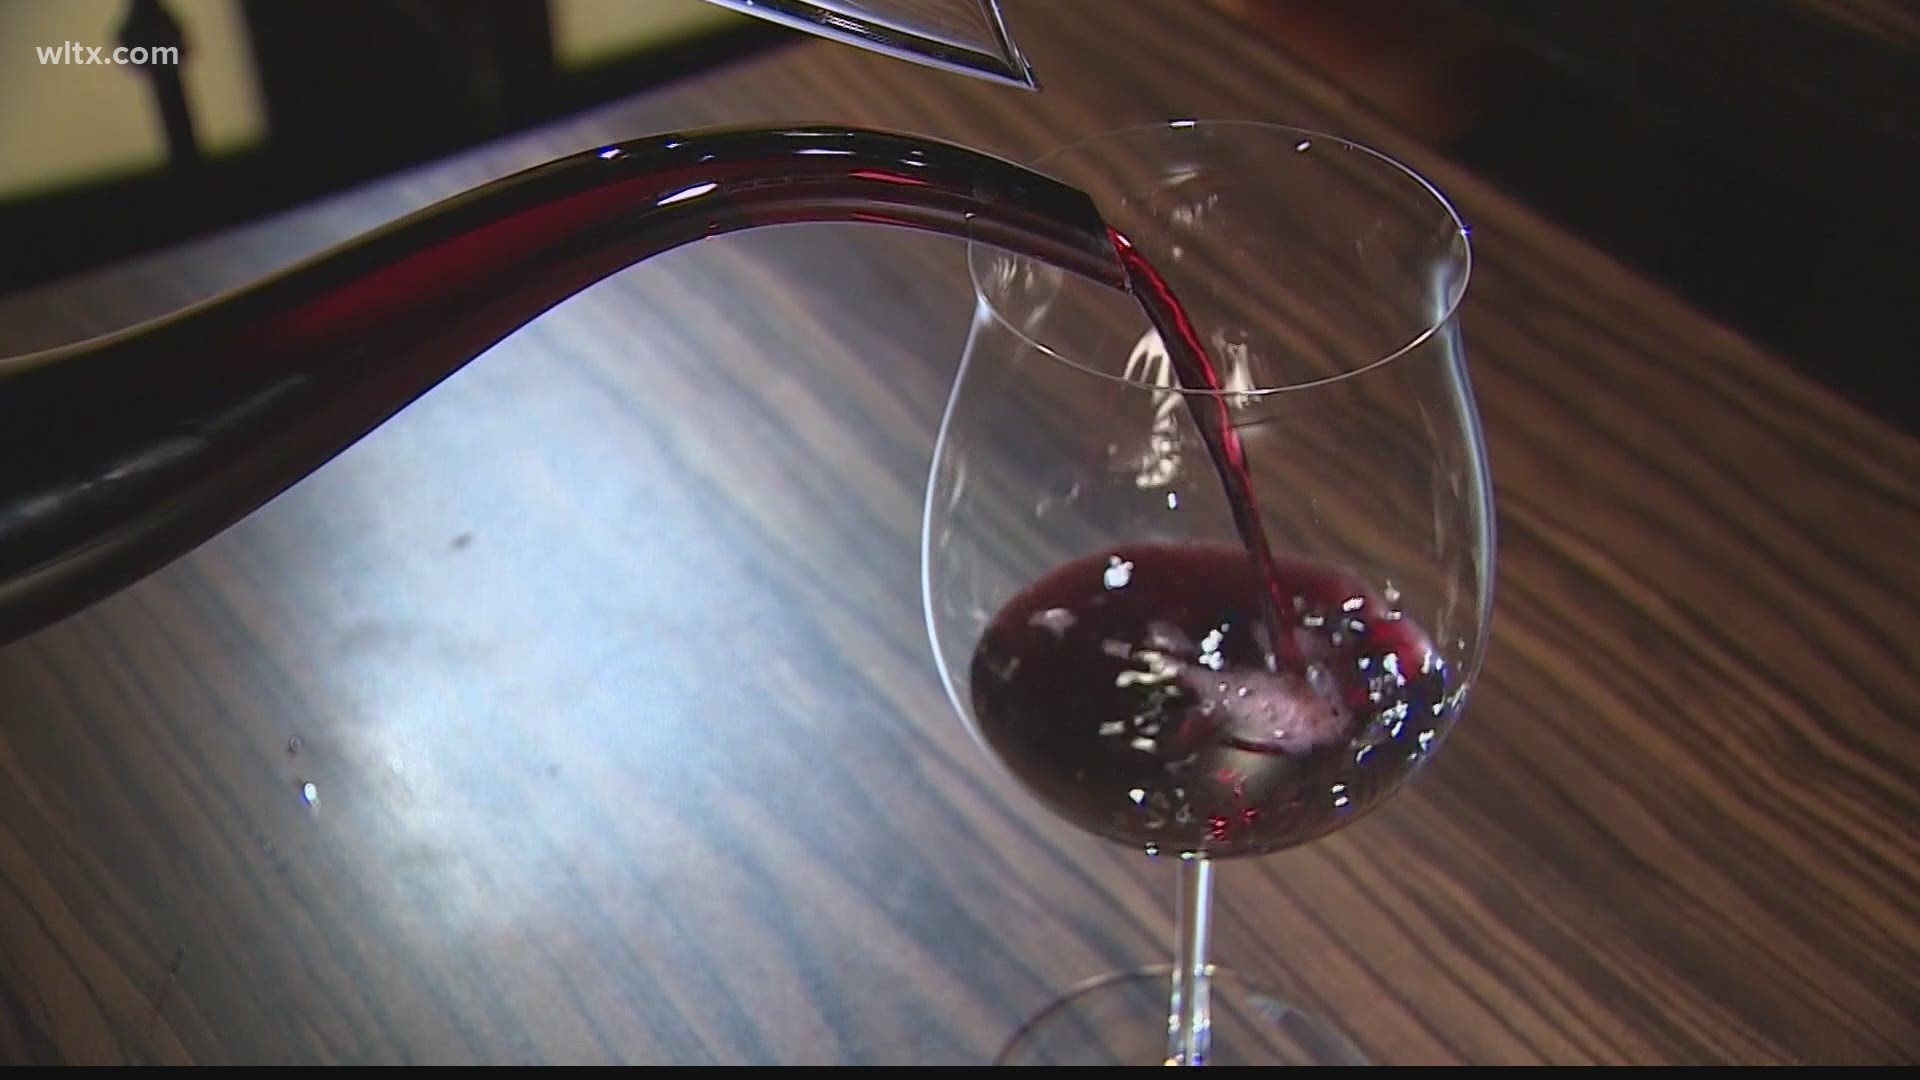 Doctors say drinking alcohol increases your chances of developing breast cancer.